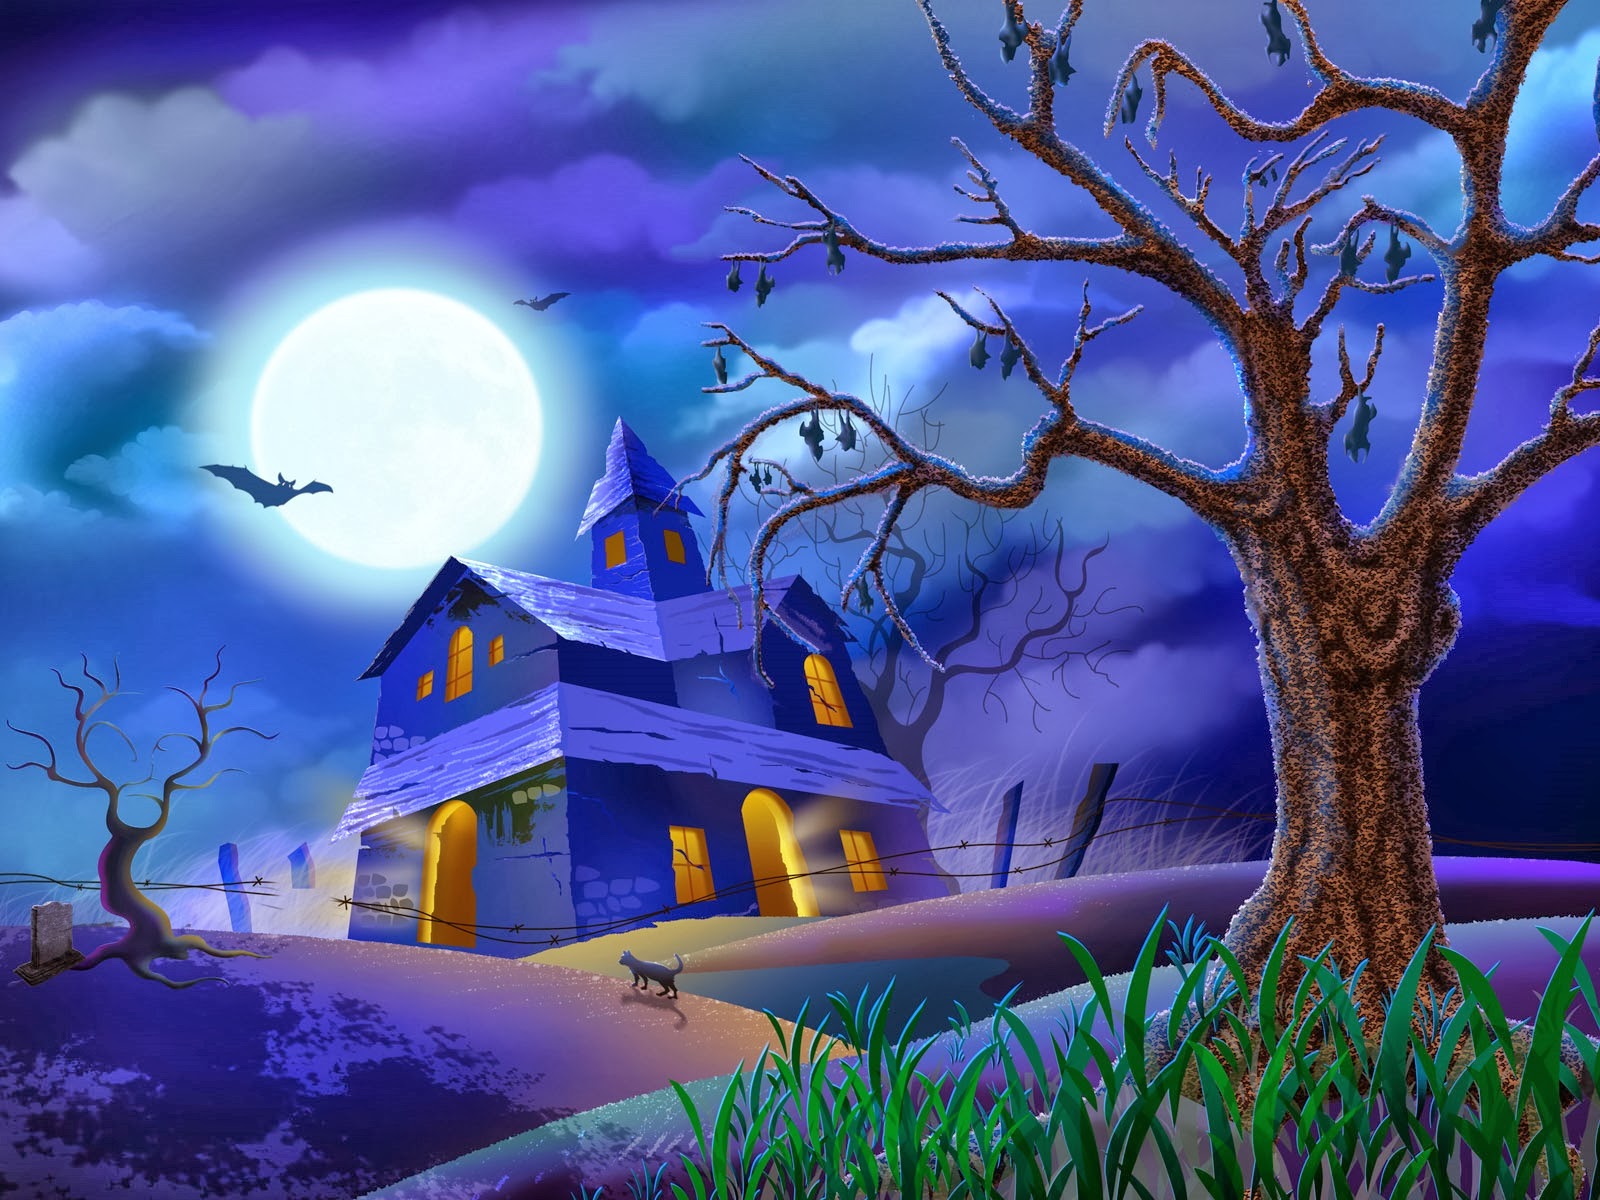 Halloween HD Wallpaper 1080p Image Background Collection